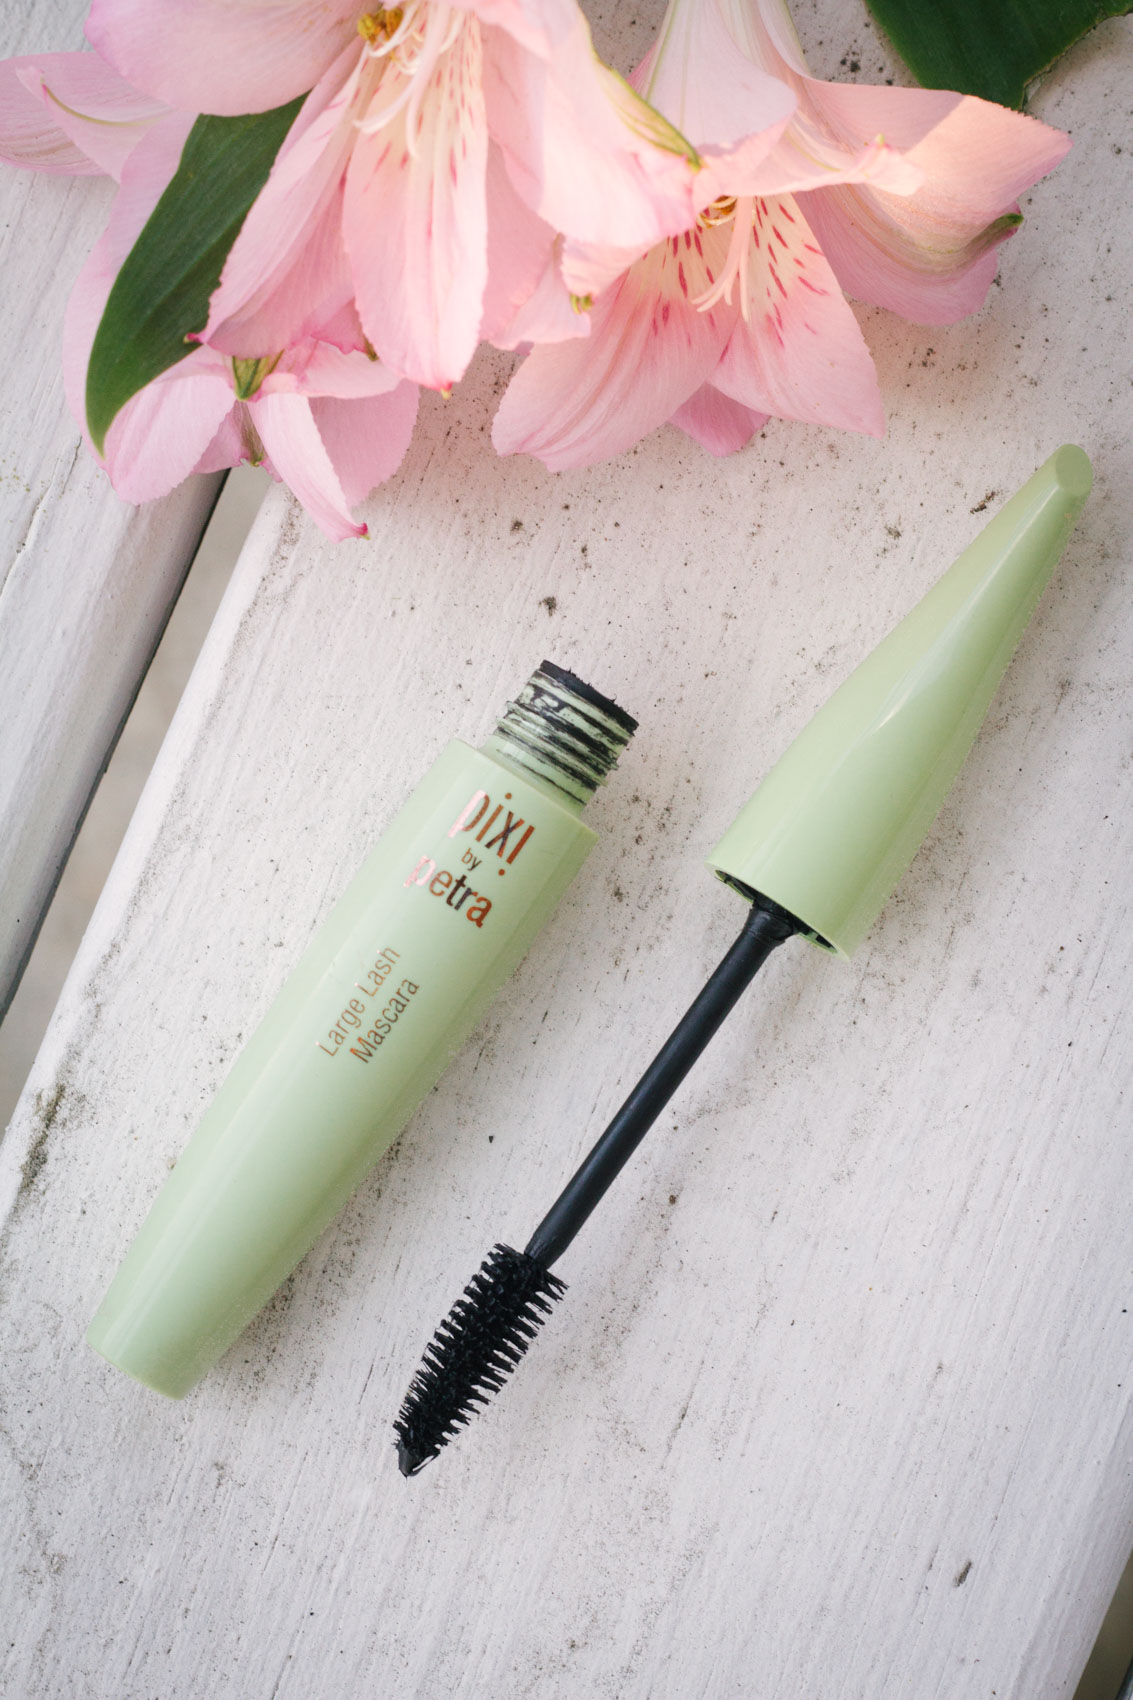 Large Lash Mascara - One swipe is all you need for longer, more volumized lashes with this mascara. For more drama, just add a few more coats to achieve your desired look.